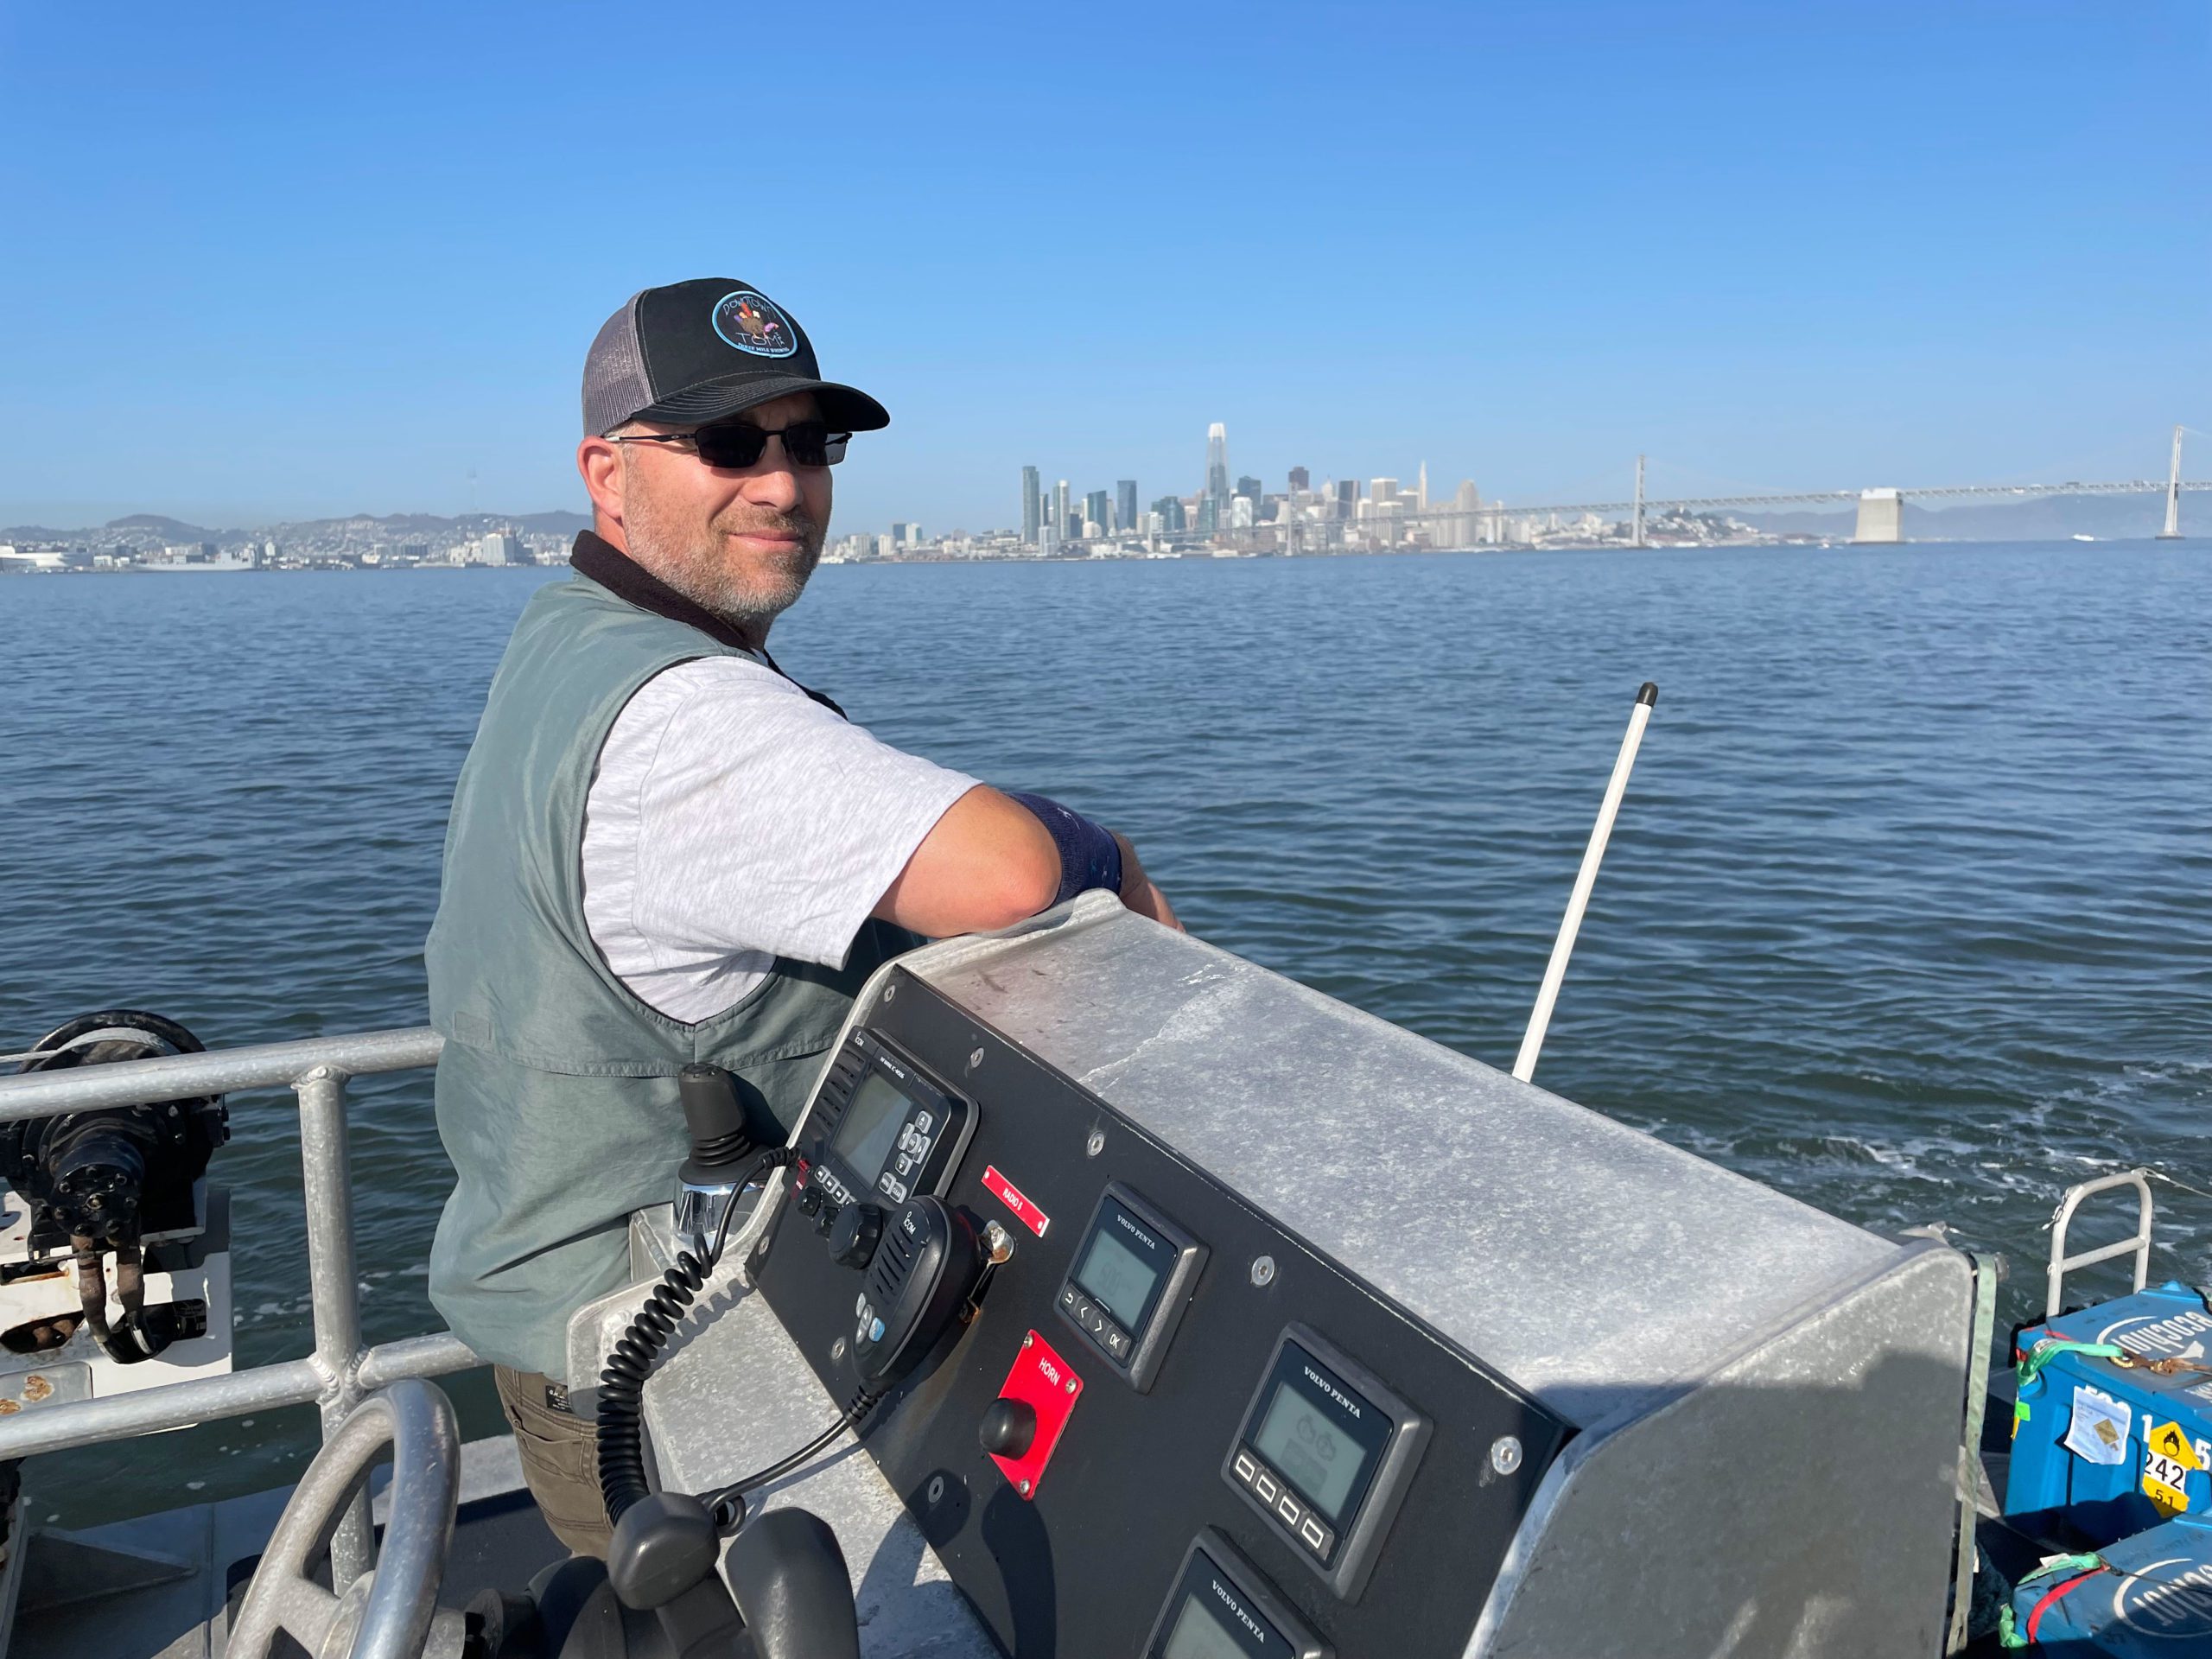 Capt. Julio Barba stands near the aft steering controls with San Francisco looming in the background.